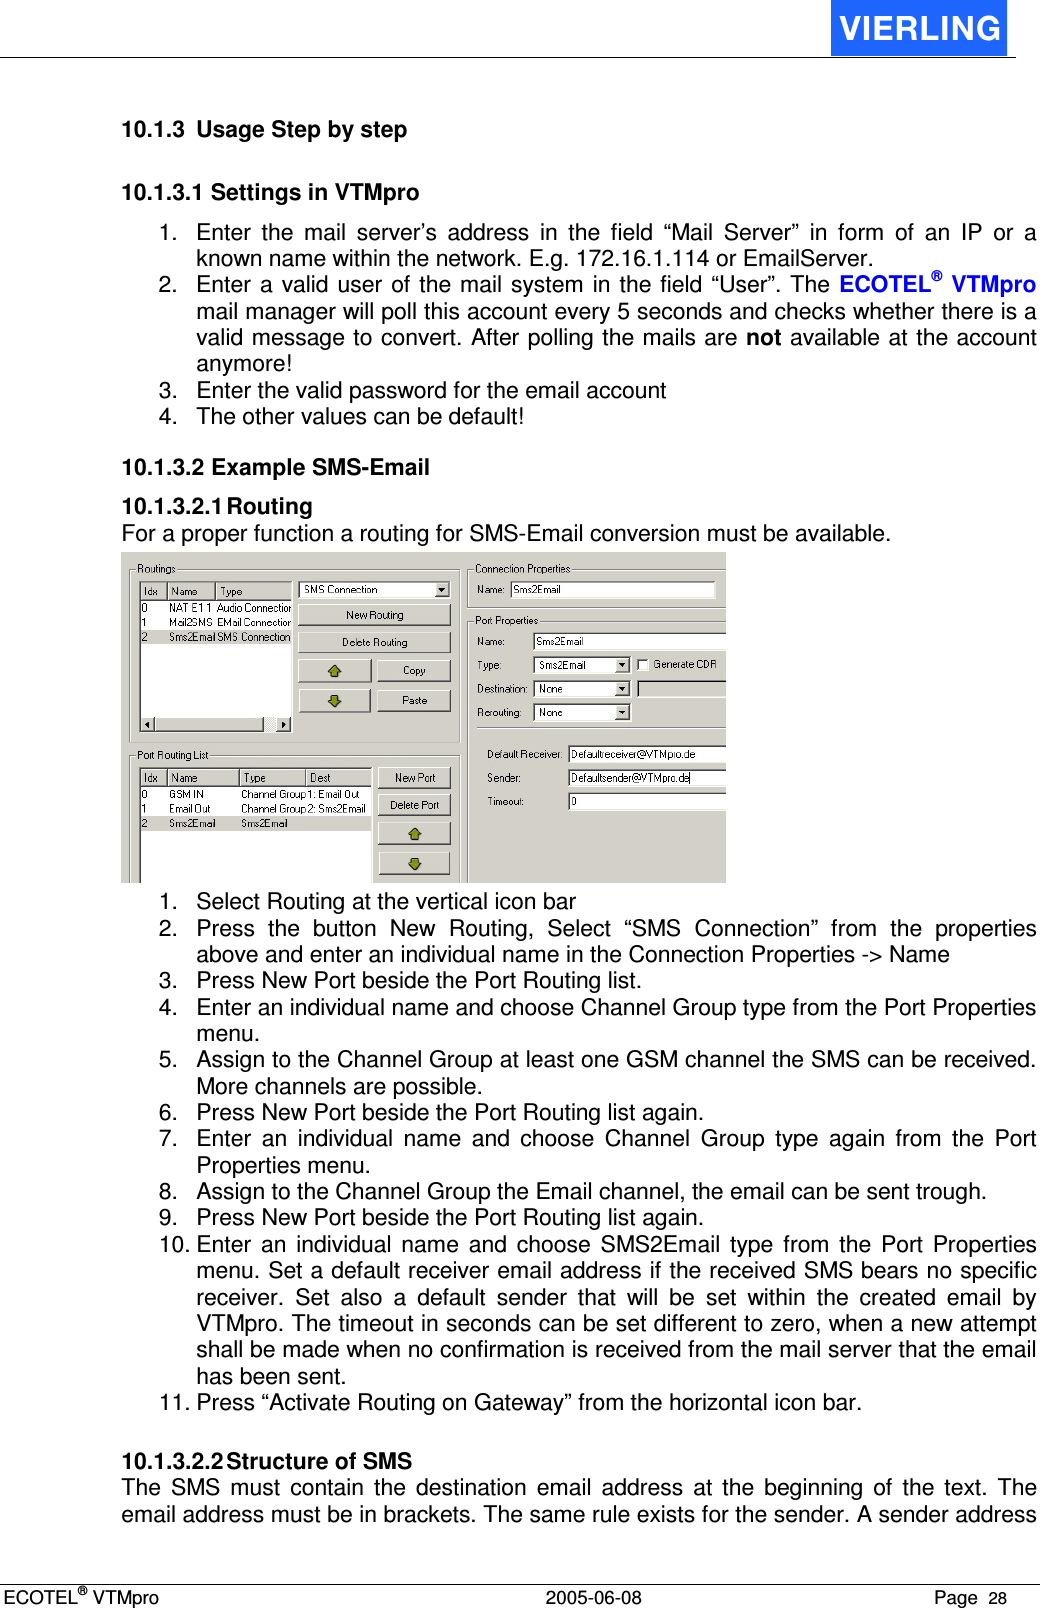 ECOTEL® VTMpro  2005-06-08 Page  28    10.1.3  Usage Step by step 10.1.3.1 Settings in VTMpro 1.  Enter  the  mail  server’s  address  in  the  field  “Mail  Server”  in  form  of  an  IP  or  a known name within the network. E.g. 172.16.1.114 or EmailServer. 2.  Enter a valid user of the mail system in  the field “User”. The ECOTEL® VTMpro mail manager will poll this account every 5 seconds and checks whether there is a valid message to convert. After polling the mails are not available at the account anymore! 3.  Enter the valid password for the email account 4.  The other values can be default! 10.1.3.2 Example SMS-Email 10.1.3.2.1 Routing For a proper function a routing for SMS-Email conversion must be available.  1.  Select Routing at the vertical icon bar 2.  Press  the  button  New  Routing,  Select  “SMS  Connection”  from  the  properties above and enter an individual name in the Connection Properties -&gt; Name 3.  Press New Port beside the Port Routing list. 4.  Enter an individual name and choose Channel Group type from the Port Properties menu. 5.  Assign to the Channel Group at least one GSM channel the SMS can be received. More channels are possible. 6.  Press New Port beside the Port Routing list again. 7.  Enter  an  individual  name  and  choose  Channel  Group  type  again  from  the  Port Properties menu. 8.  Assign to the Channel Group the Email channel, the email can be sent trough.  9.  Press New Port beside the Port Routing list again. 10. Enter  an  individual  name  and  choose  SMS2Email  type  from  the  Port  Properties menu. Set a default receiver email address if the received SMS bears no specific receiver.  Set  also  a  default  sender  that  will  be  set  within  the  created  email  by VTMpro. The timeout in seconds can be set different to zero, when a new attempt shall be made when no confirmation is received from the mail server that the email has been sent. 11. Press “Activate Routing on Gateway” from the horizontal icon bar.  10.1.3.2.2 Structure of SMS The  SMS  must  contain  the  destination  email  address  at  the  beginning  of  the  text.  The email address must be in brackets. The same rule exists for the sender. A sender address 